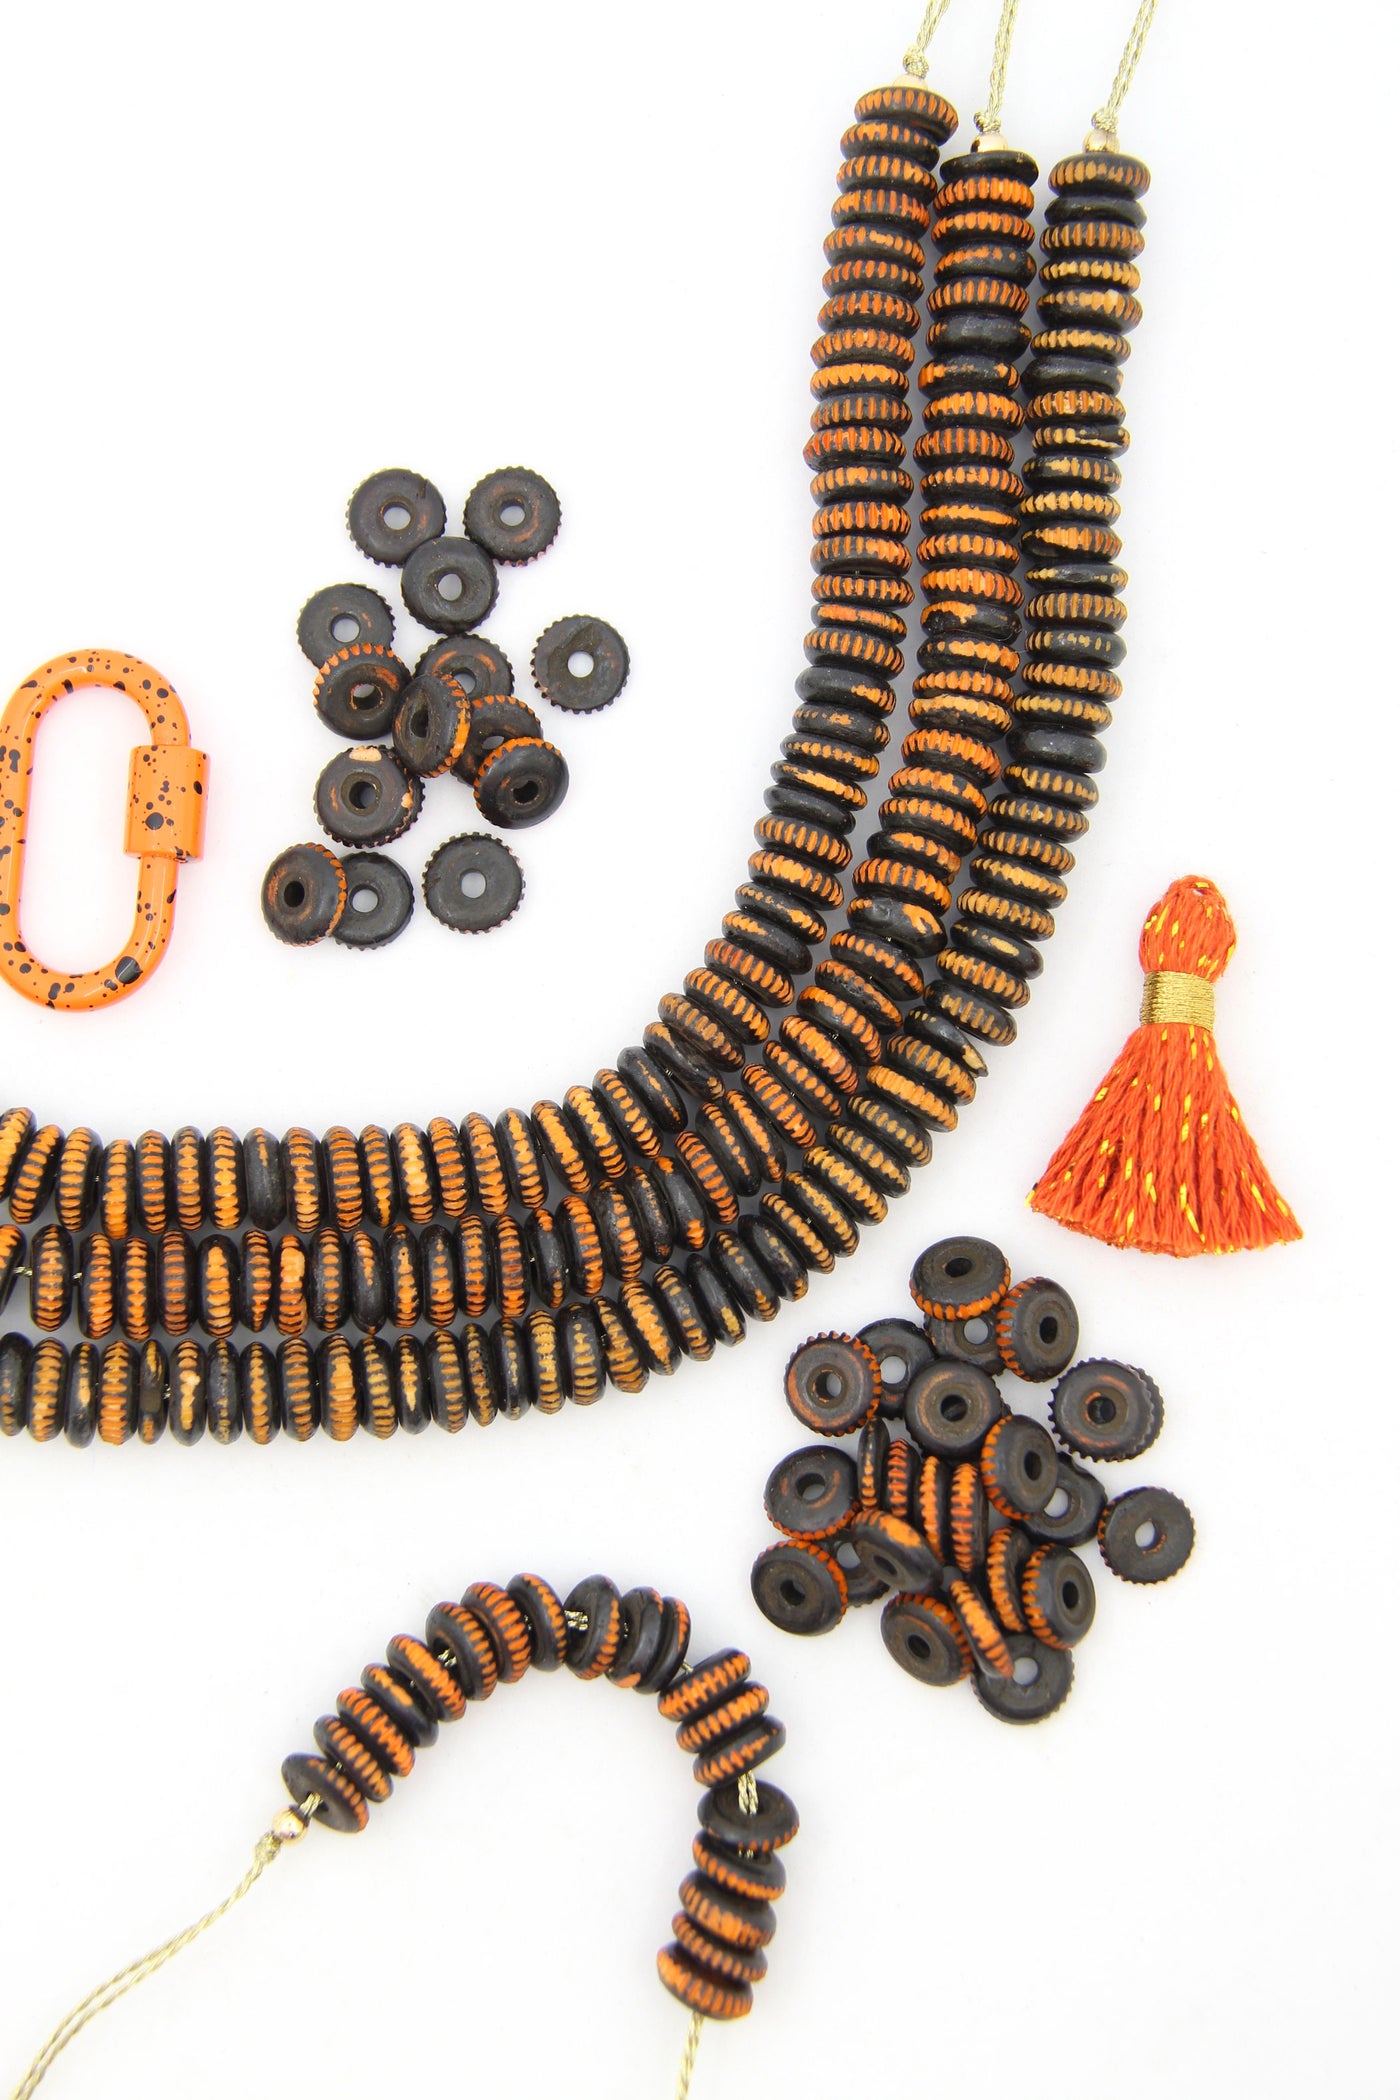 Beads for making fun Halloween necklaces, or for DIY projects for your Halloween collection.